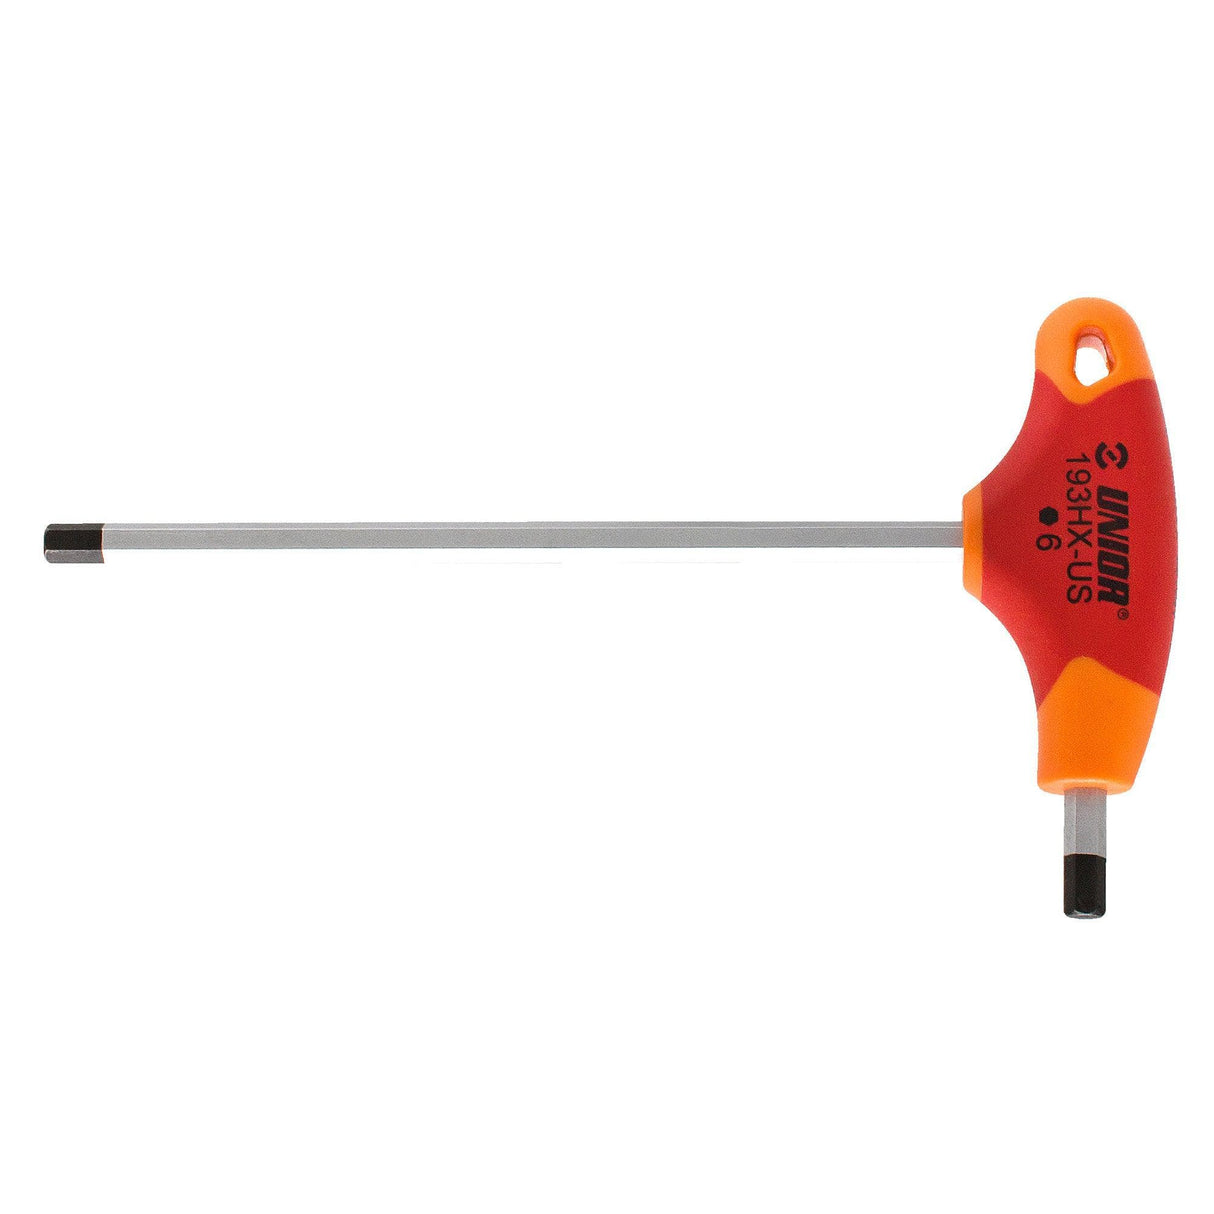 Unior Hexagonal Head Screwdriver With T-Handle: Red 5Mm